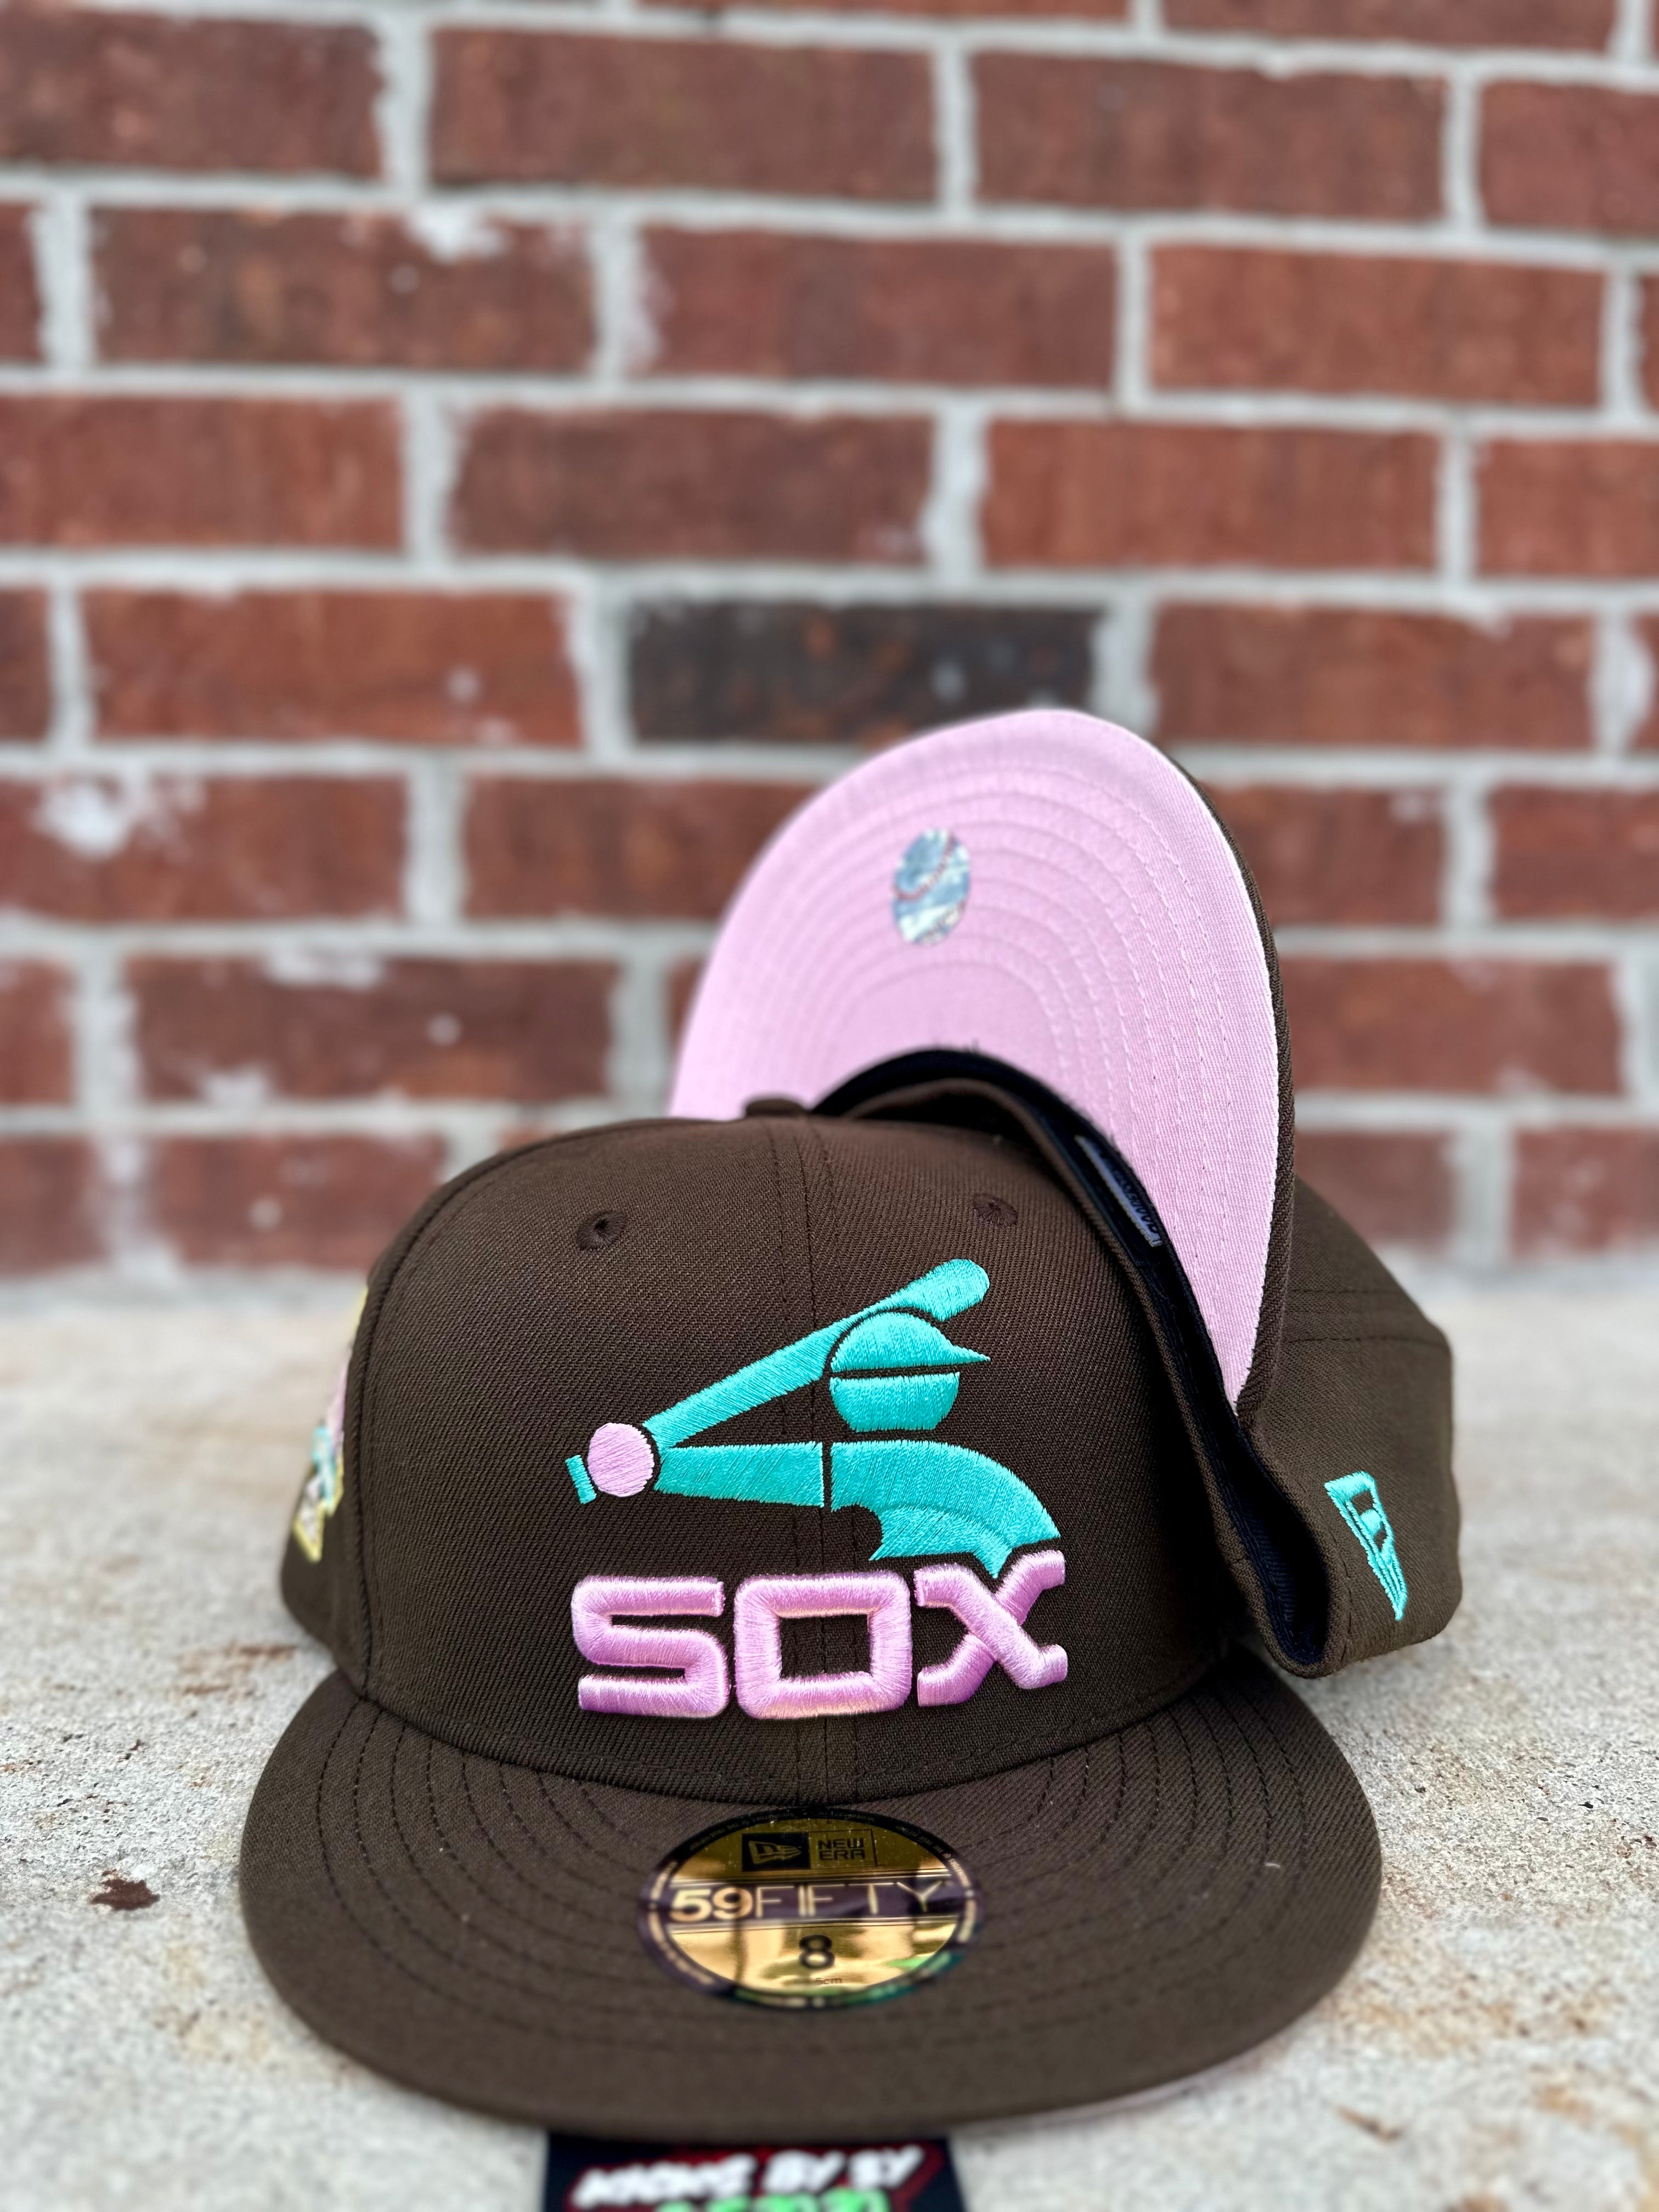 New Era 59 FIFTY Fitted "Chicago White Sox" Mocha Brown/Mint/Ice Cream Pink